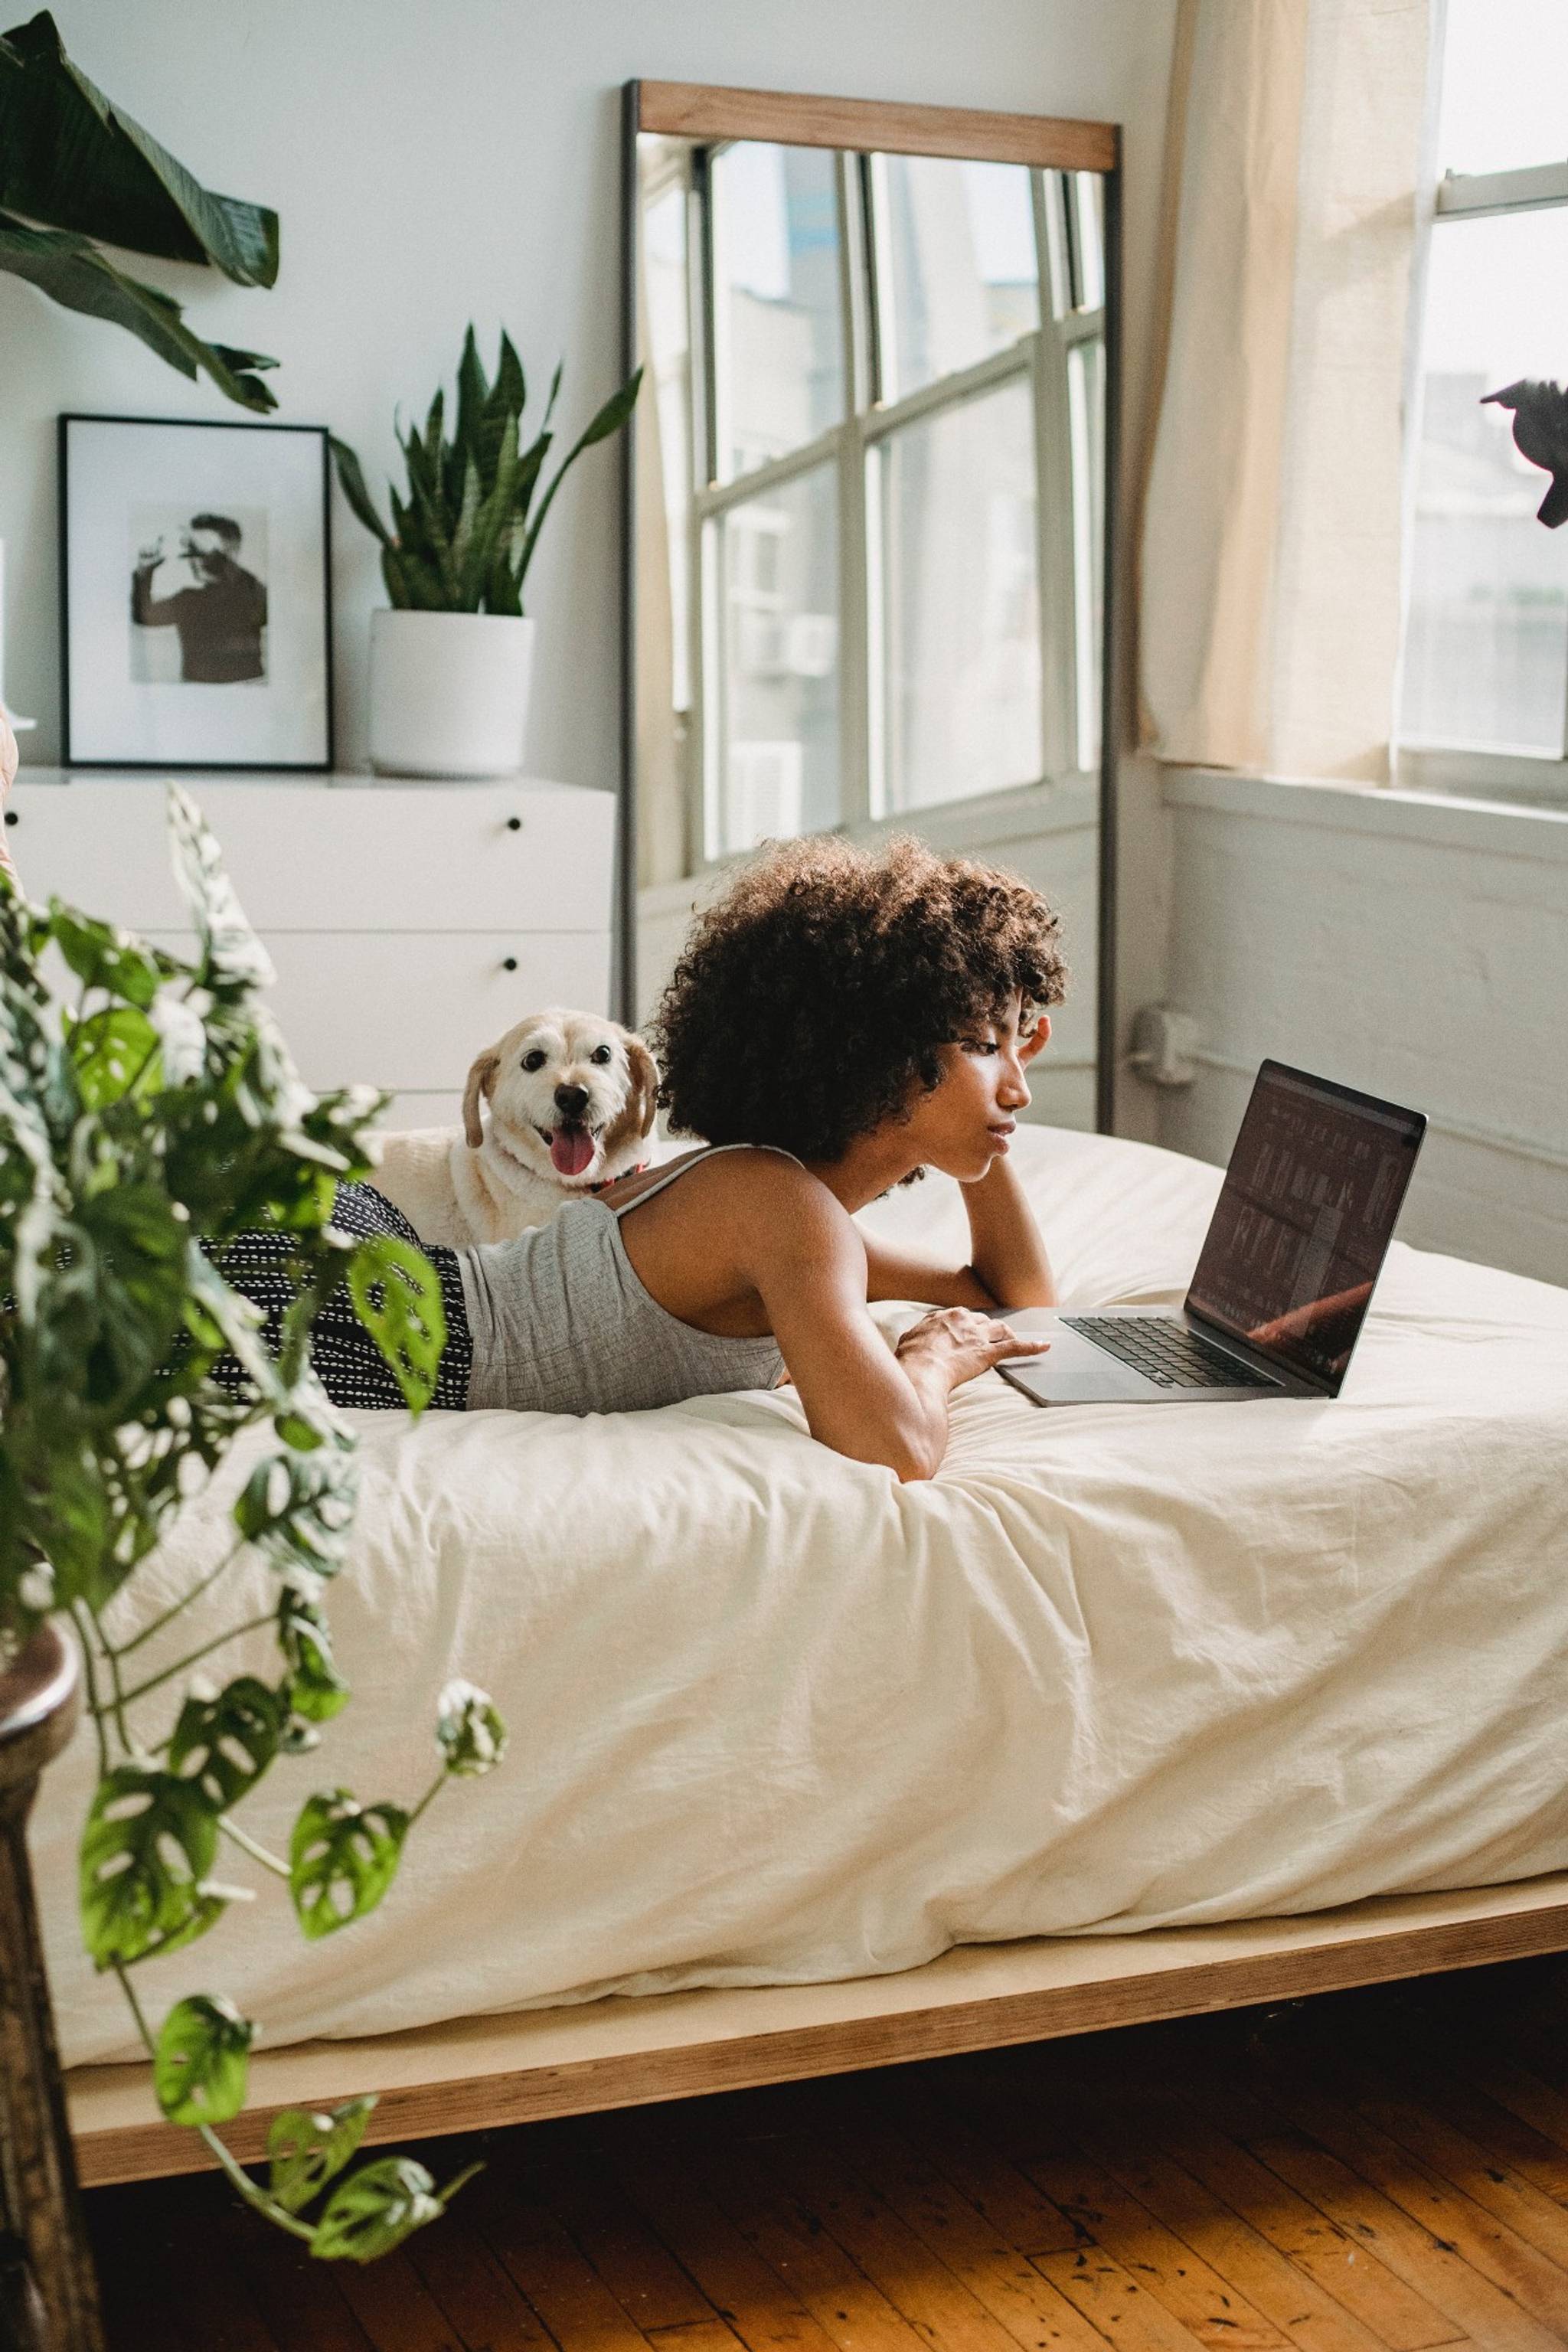 Pet-tech booms as remote workers return to the office